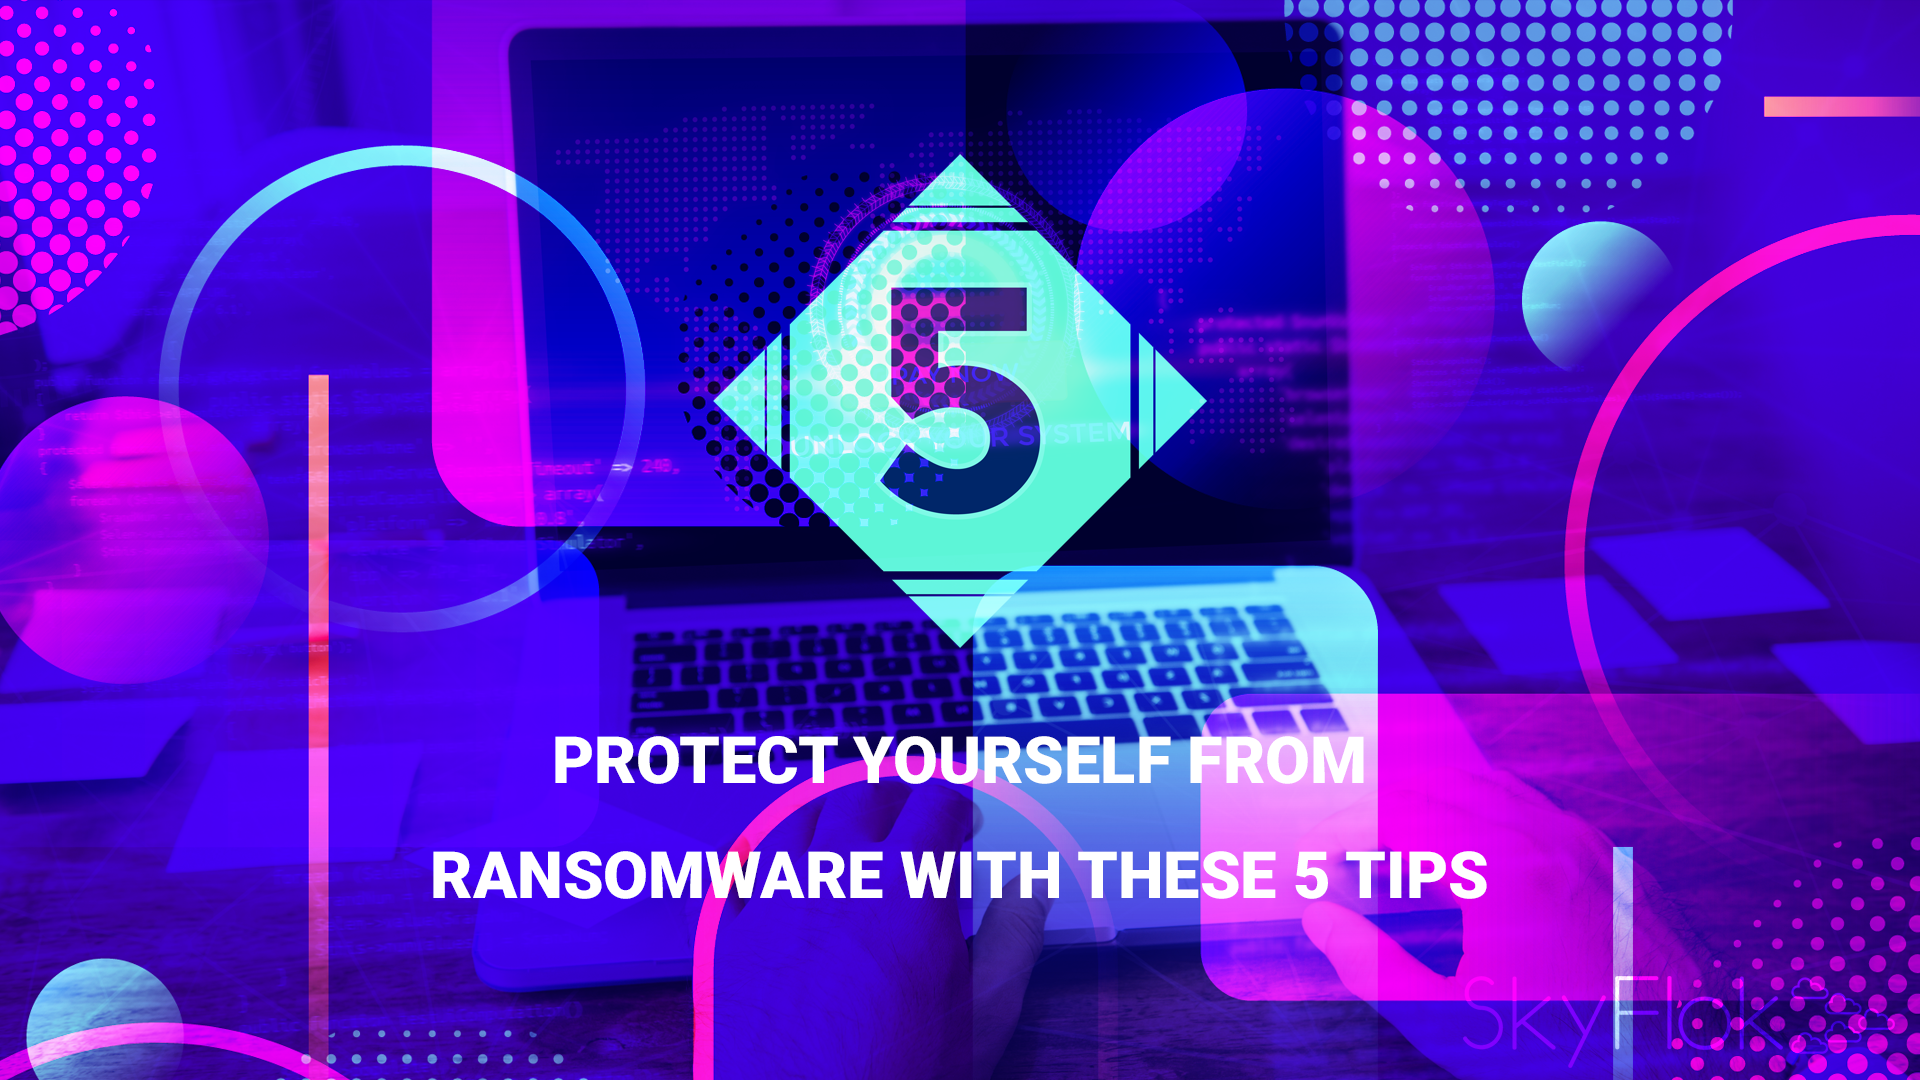 Protect yourself from ransomware with these 5 tips